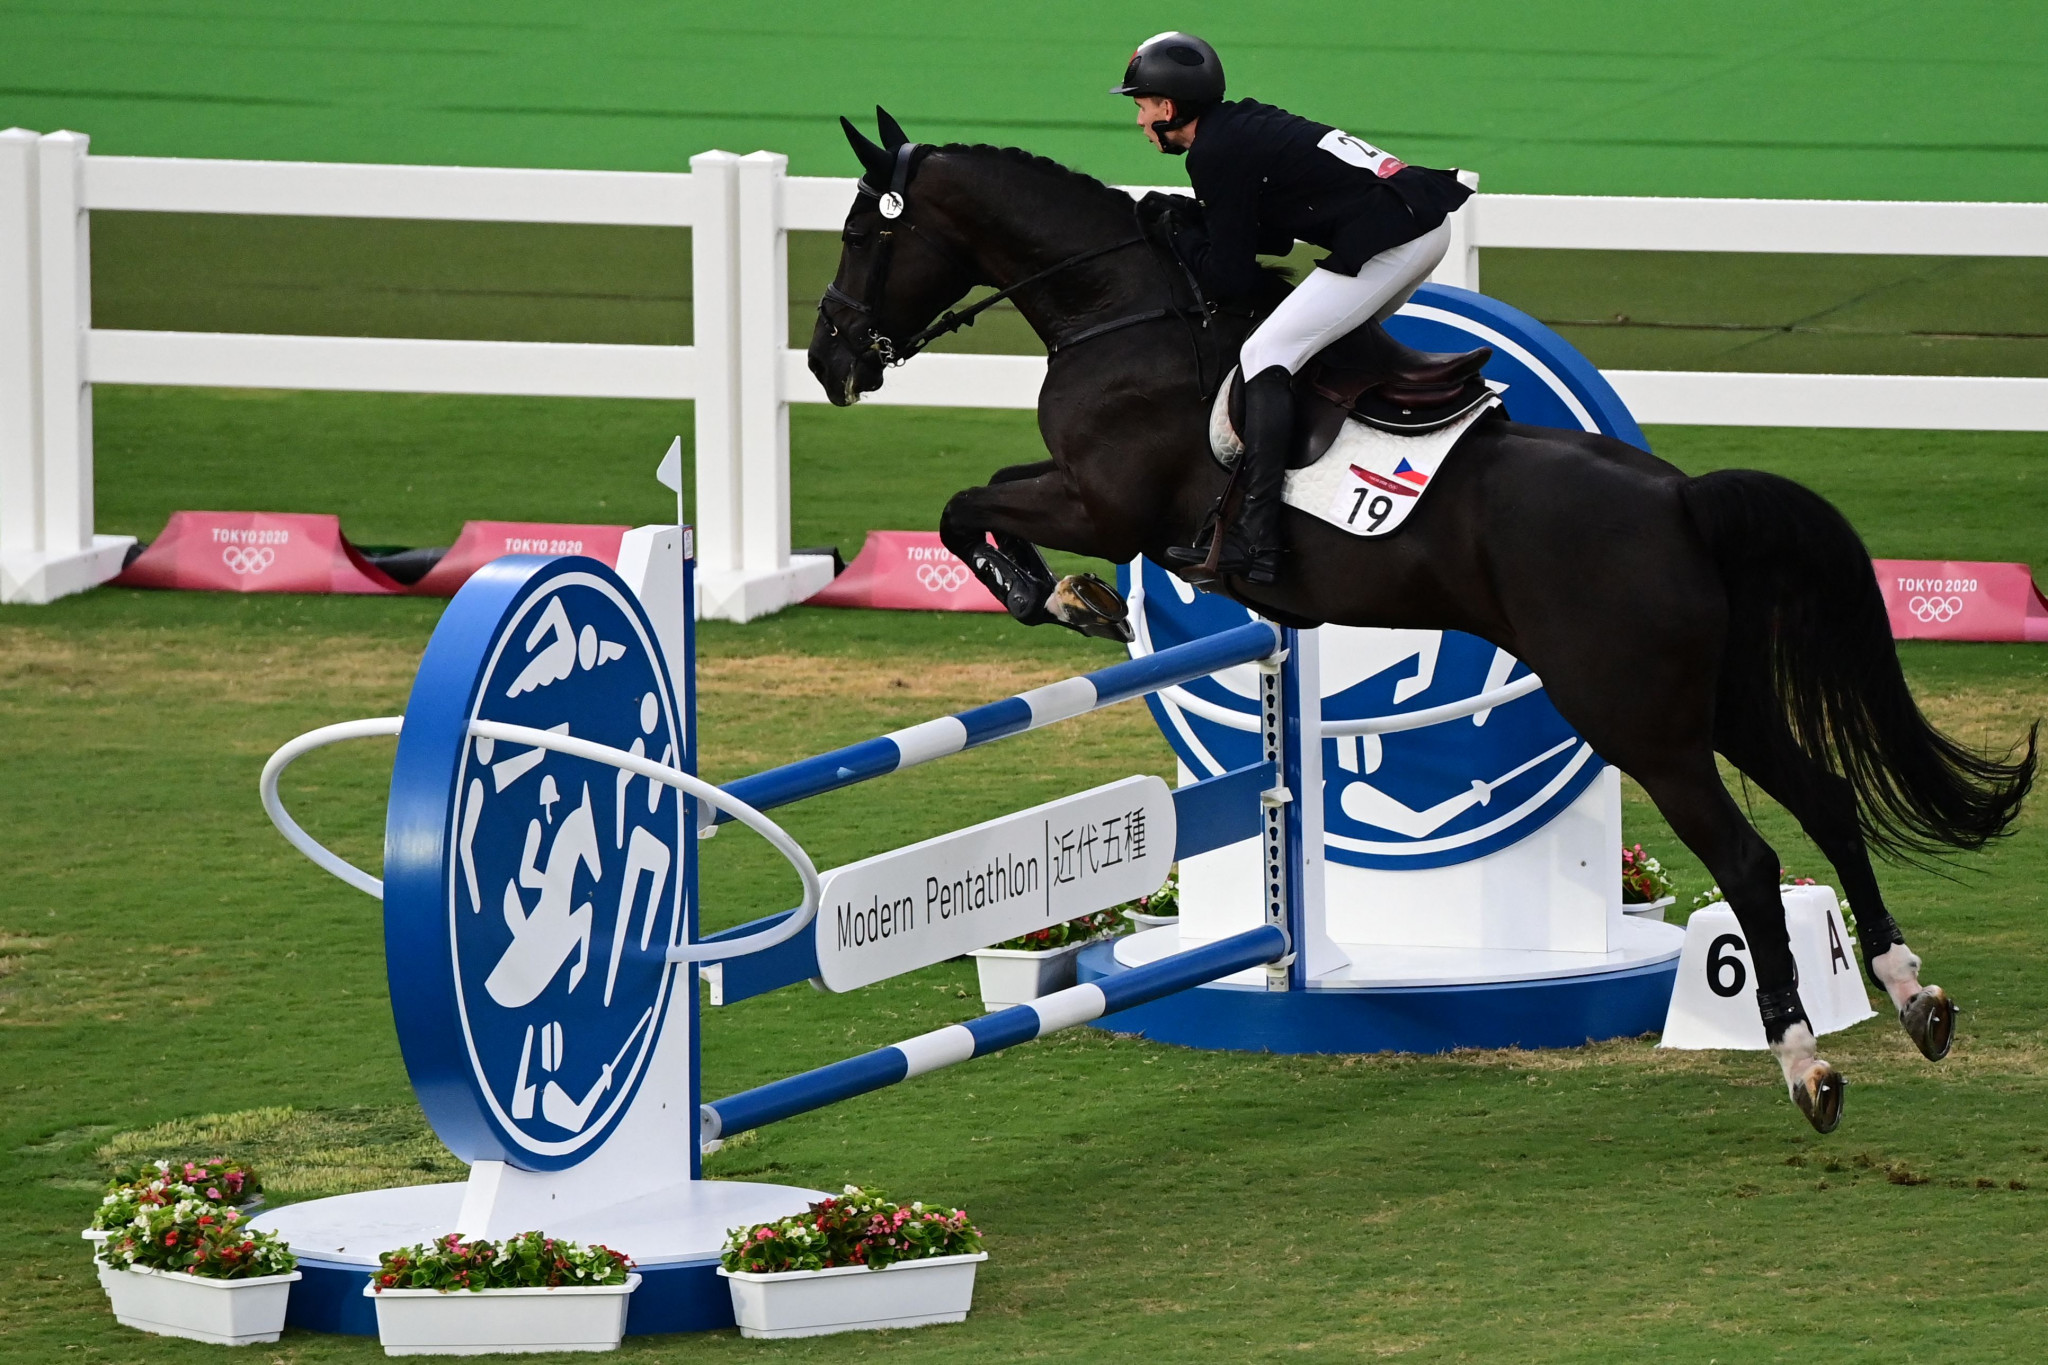 Riding is set to be dropped from modern pentathlon after the Paris 2024 Olympics ©Getty Images